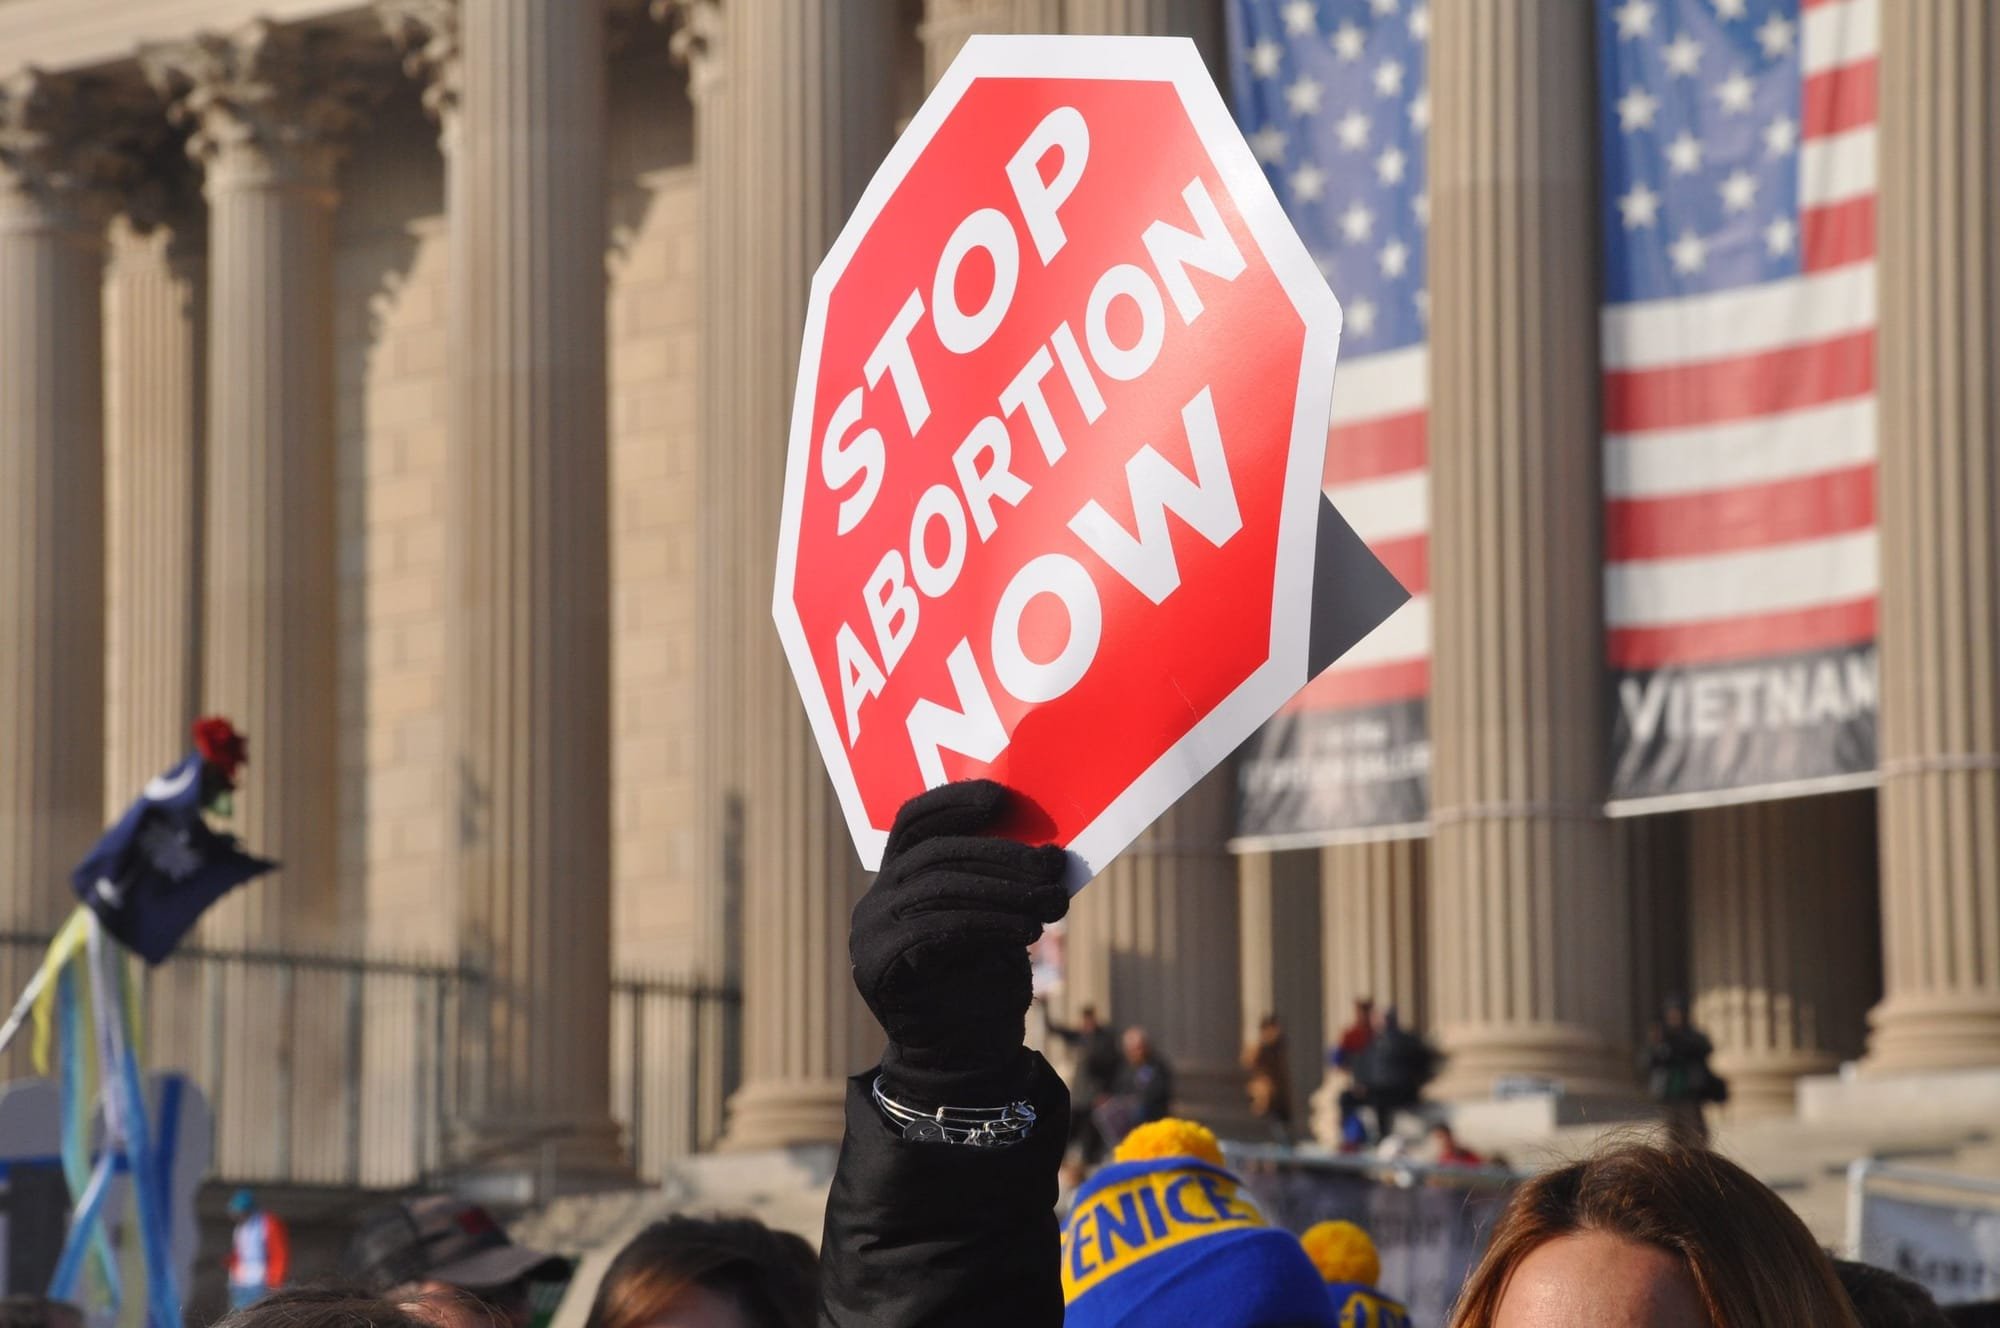 Winning. Kentucky let's abortion ban law remain in place.